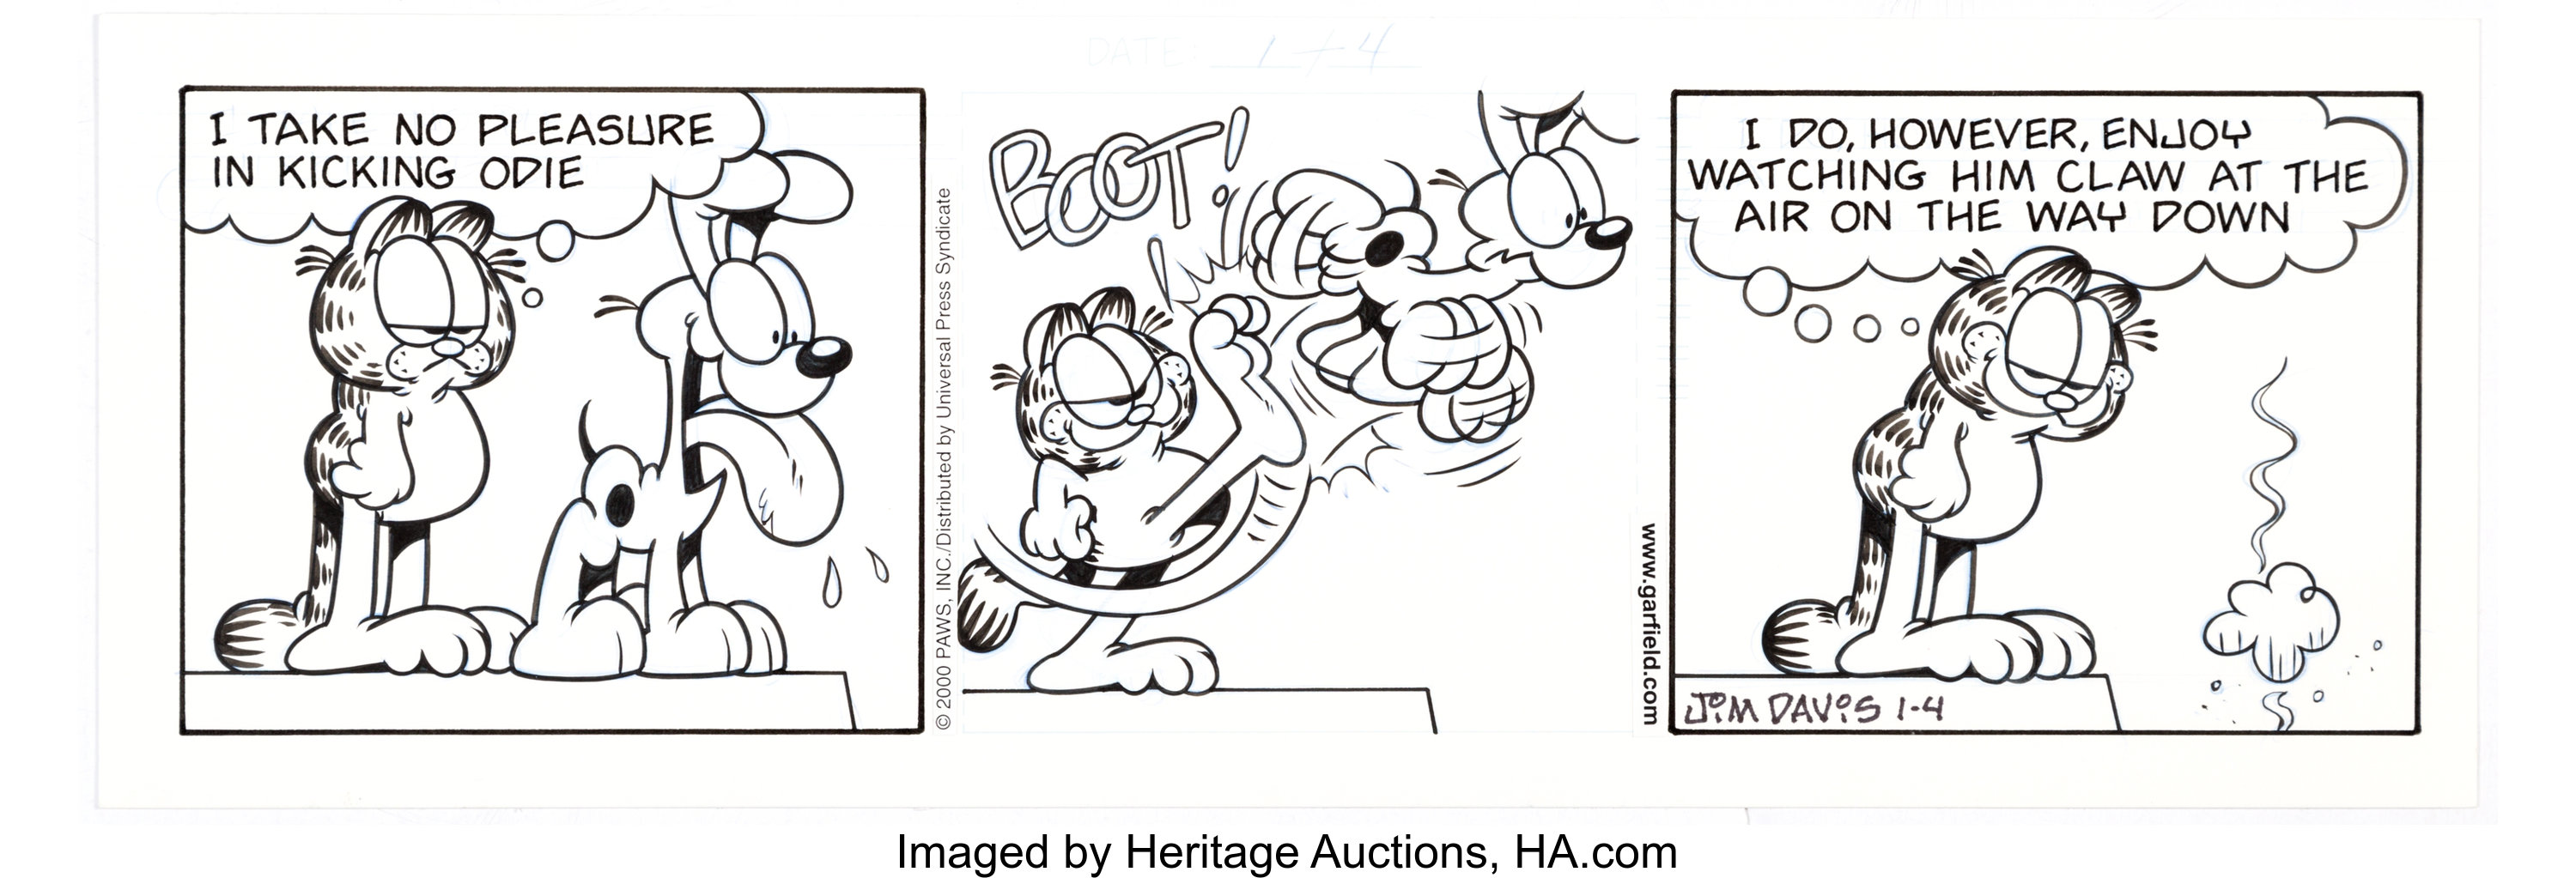 This Jim Davis "Garfield" Daily Comic Strip Original Art dated 1-4-00 (PAWS/Universal Feature Syndicate, 2000) sold for just over $1000 in a recent Heritage Auction. From the Jim Davis Collection.